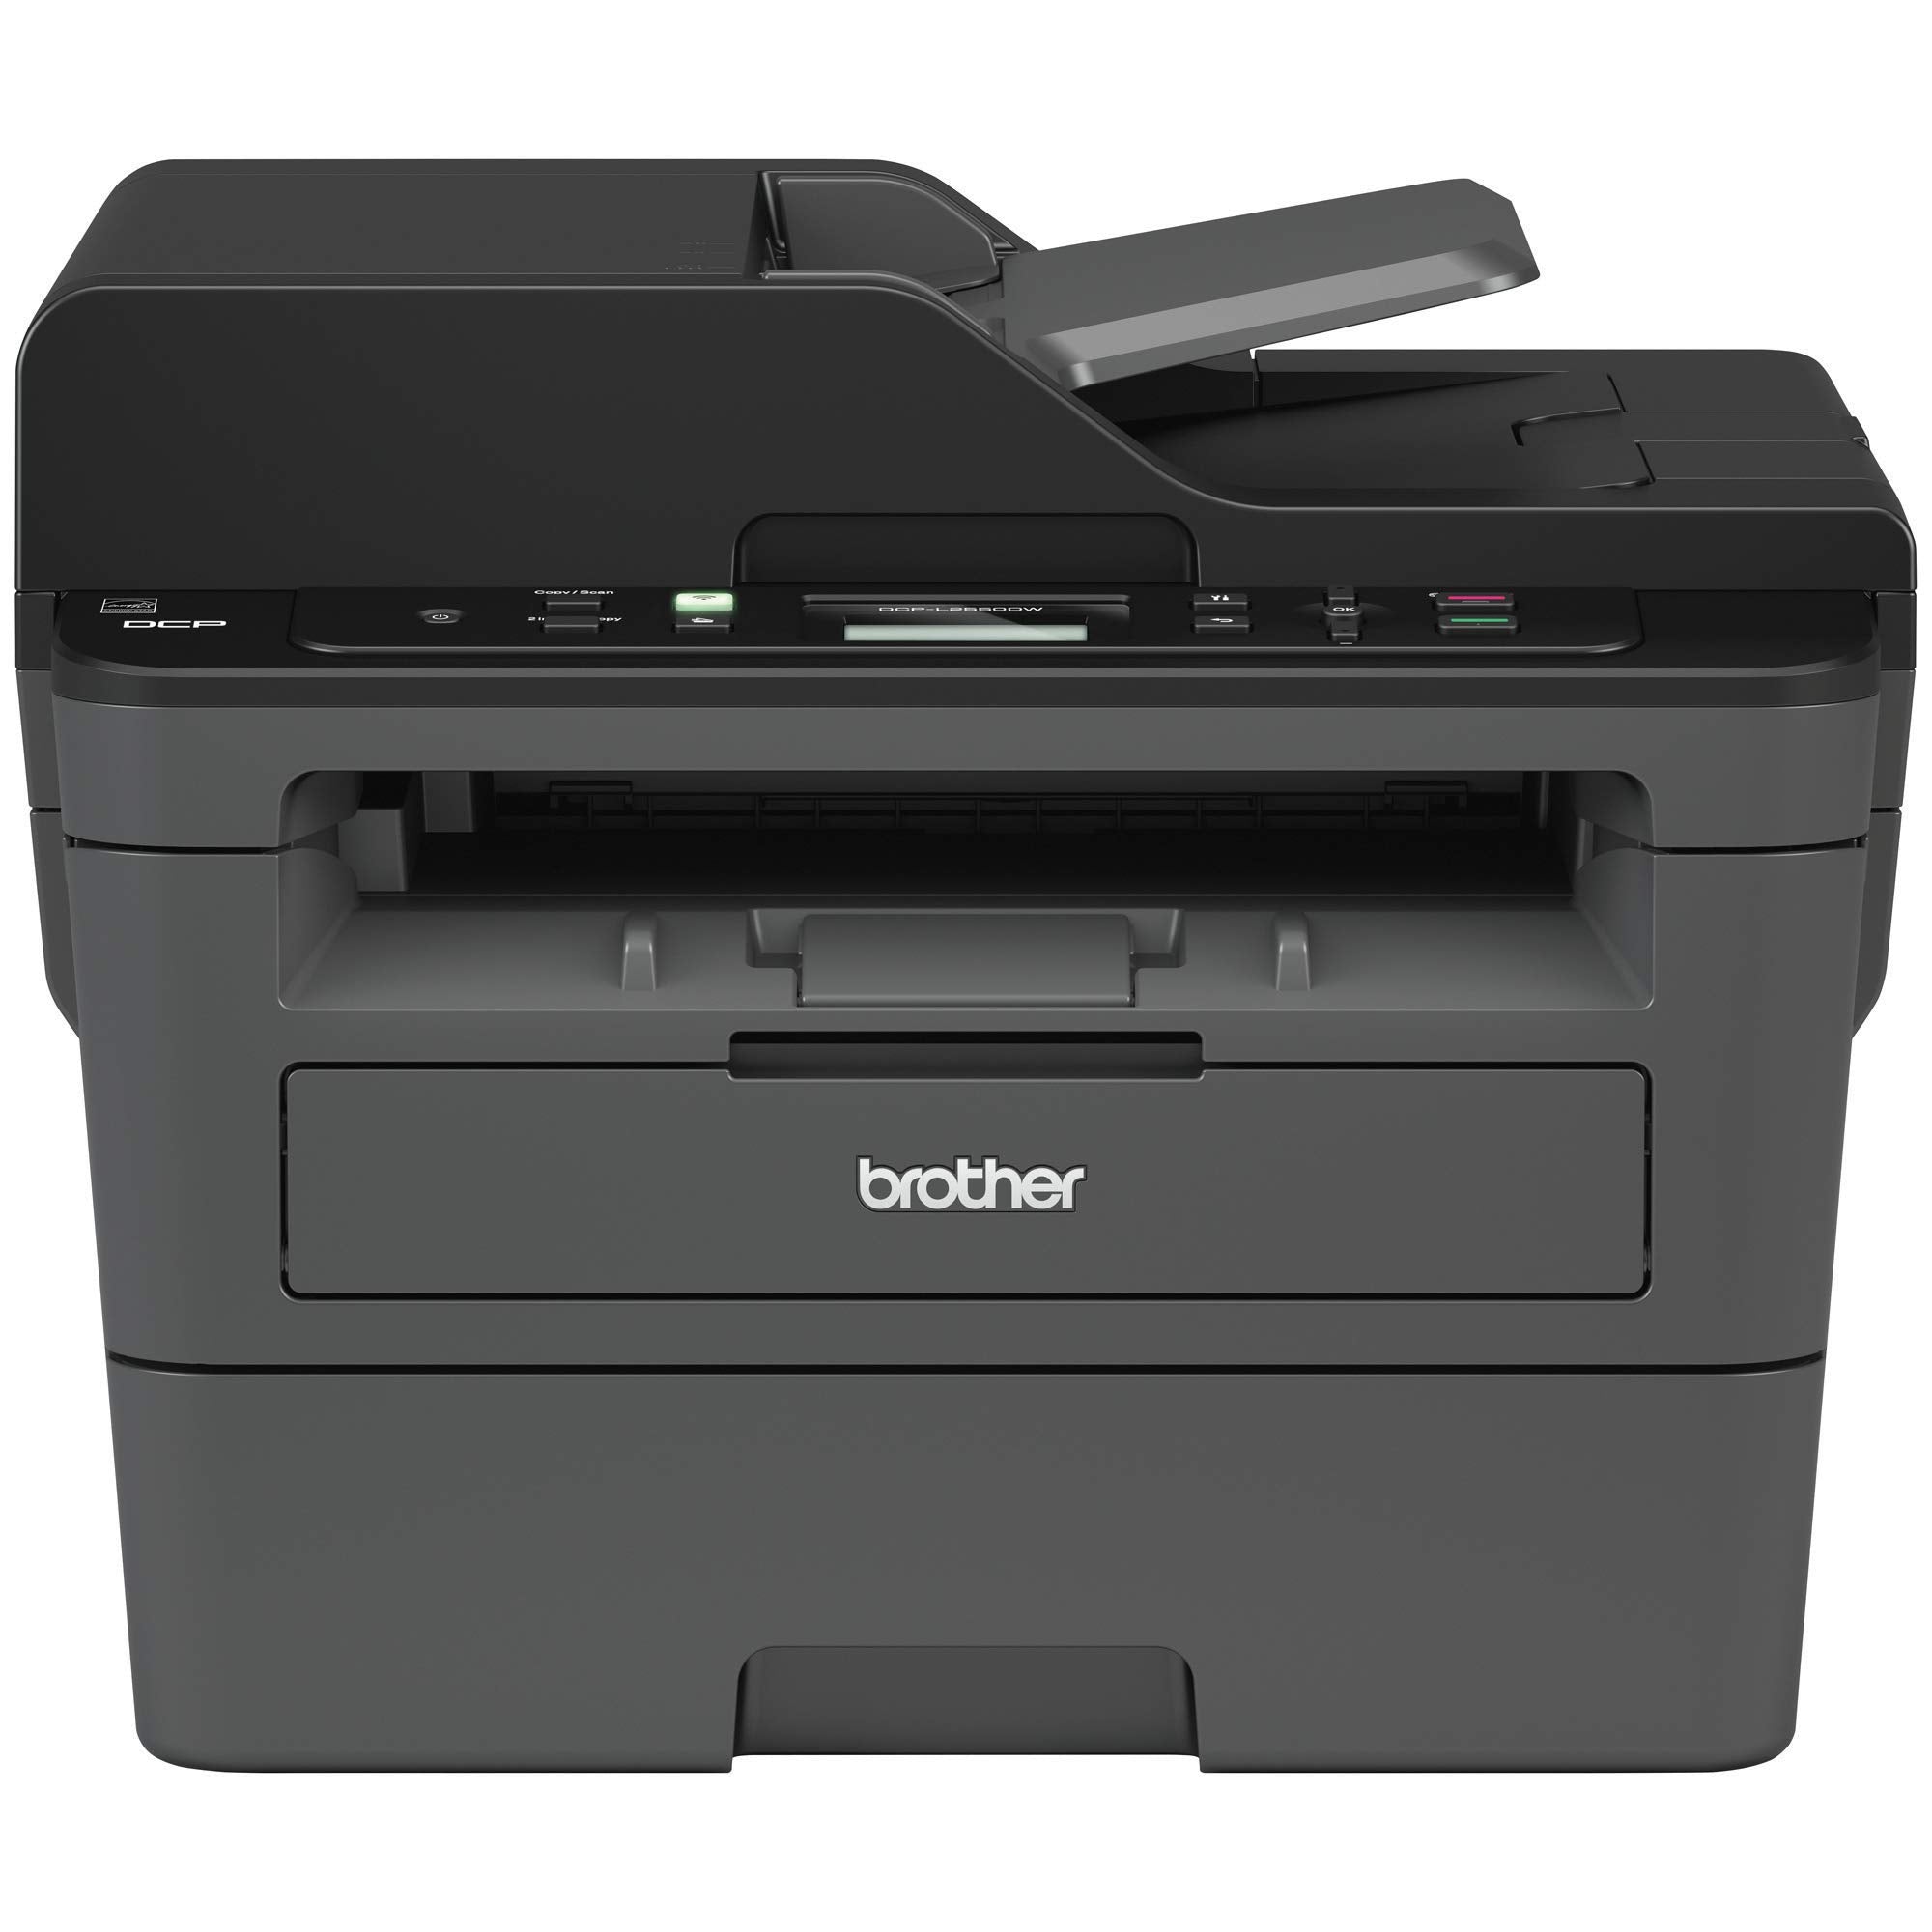 Brother Printer RDCPL2550DW Monochrome Printer with Scanner and Copier 2.7inch (Refurbished)